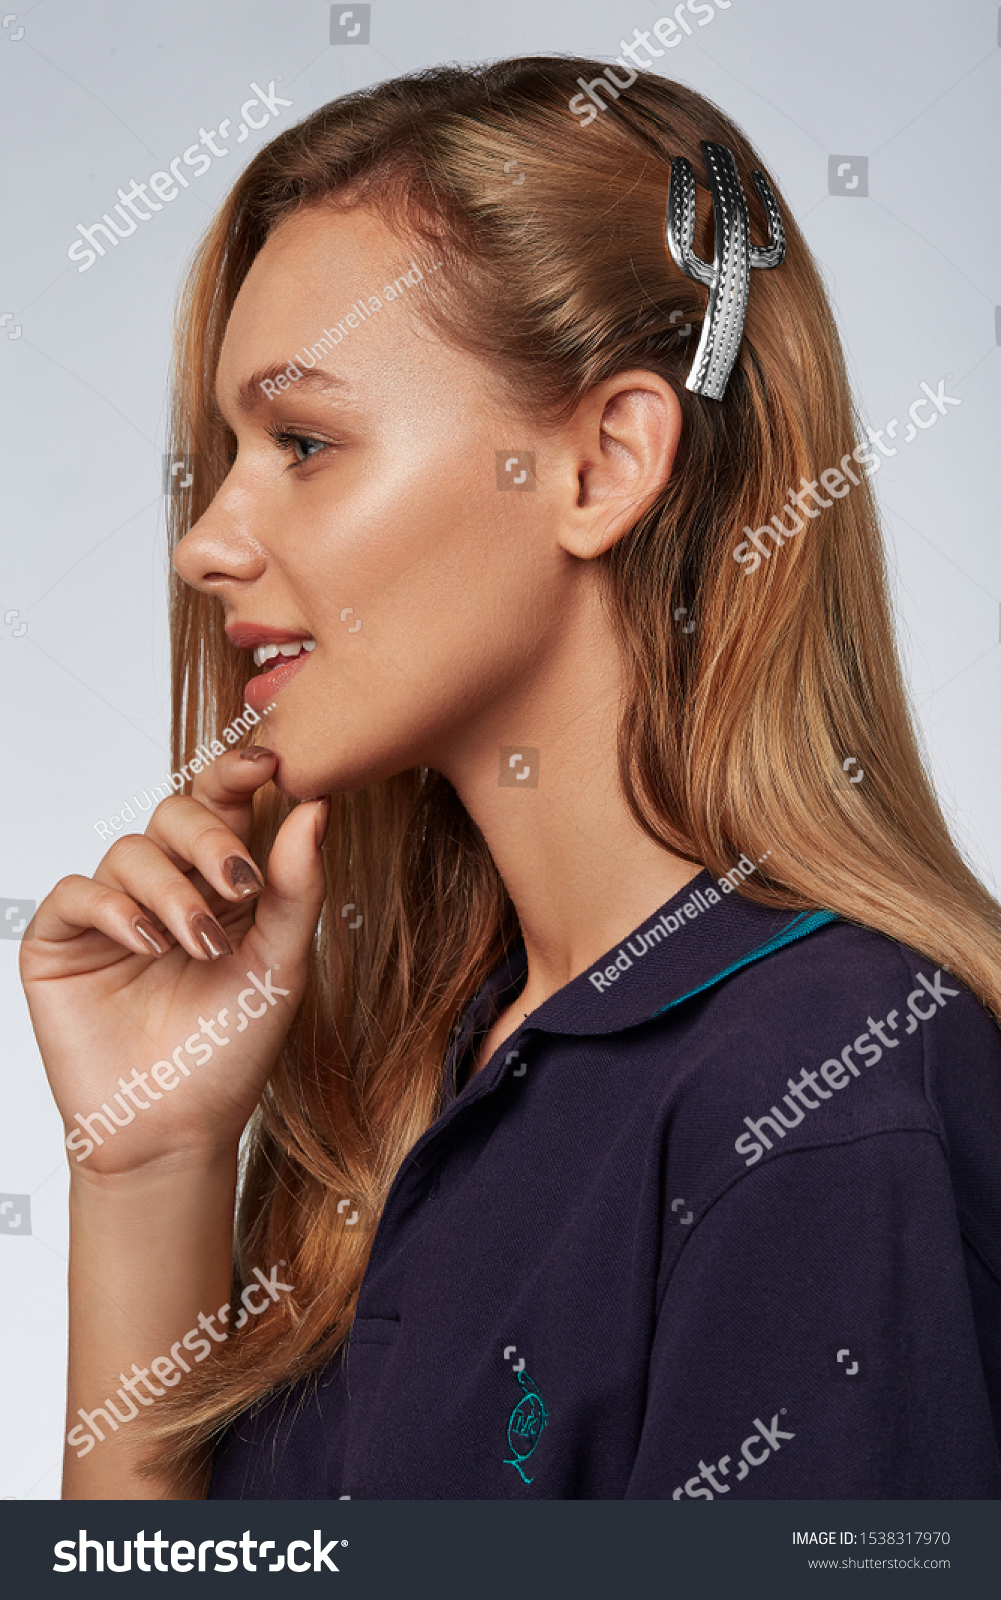  Profile portrait shot of a smiling lady with blond hair, posing on a blue background. She has a silver hair clip in the form of cactus. The girl is wearing a dark blue T-shirt #1538317970